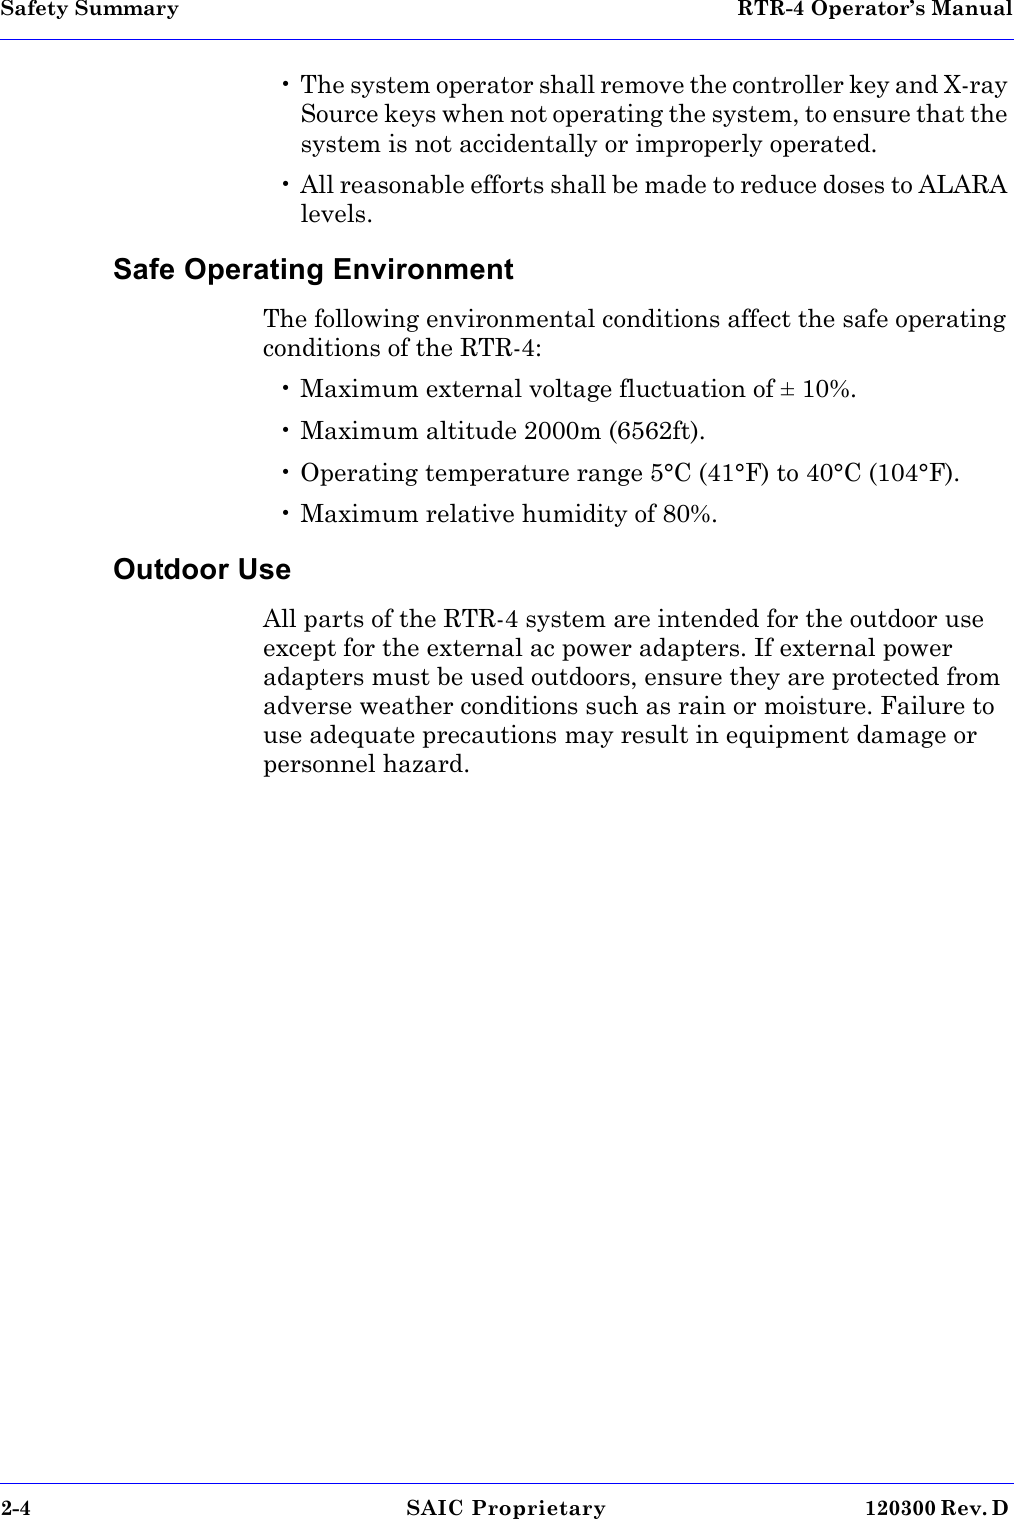 Safety Summary  RTR-4 Operator’s Manual2-4 SAIC Proprietary 120300 Rev. D • The system operator shall remove the controller key and X-ray Source keys when not operating the system, to ensure that the system is not accidentally or improperly operated.• All reasonable efforts shall be made to reduce doses to ALARA levels.Safe Operating EnvironmentThe following environmental conditions affect the safe operating conditions of the RTR-4:• Maximum external voltage fluctuation of ± 10%.• Maximum altitude 2000m (6562ft).• Operating temperature range 5°C (41°F) to 40°C (104°F).• Maximum relative humidity of 80%.Outdoor UseAll parts of the RTR-4 system are intended for the outdoor use except for the external ac power adapters. If external power adapters must be used outdoors, ensure they are protected from adverse weather conditions such as rain or moisture. Failure to use adequate precautions may result in equipment damage or personnel hazard. 